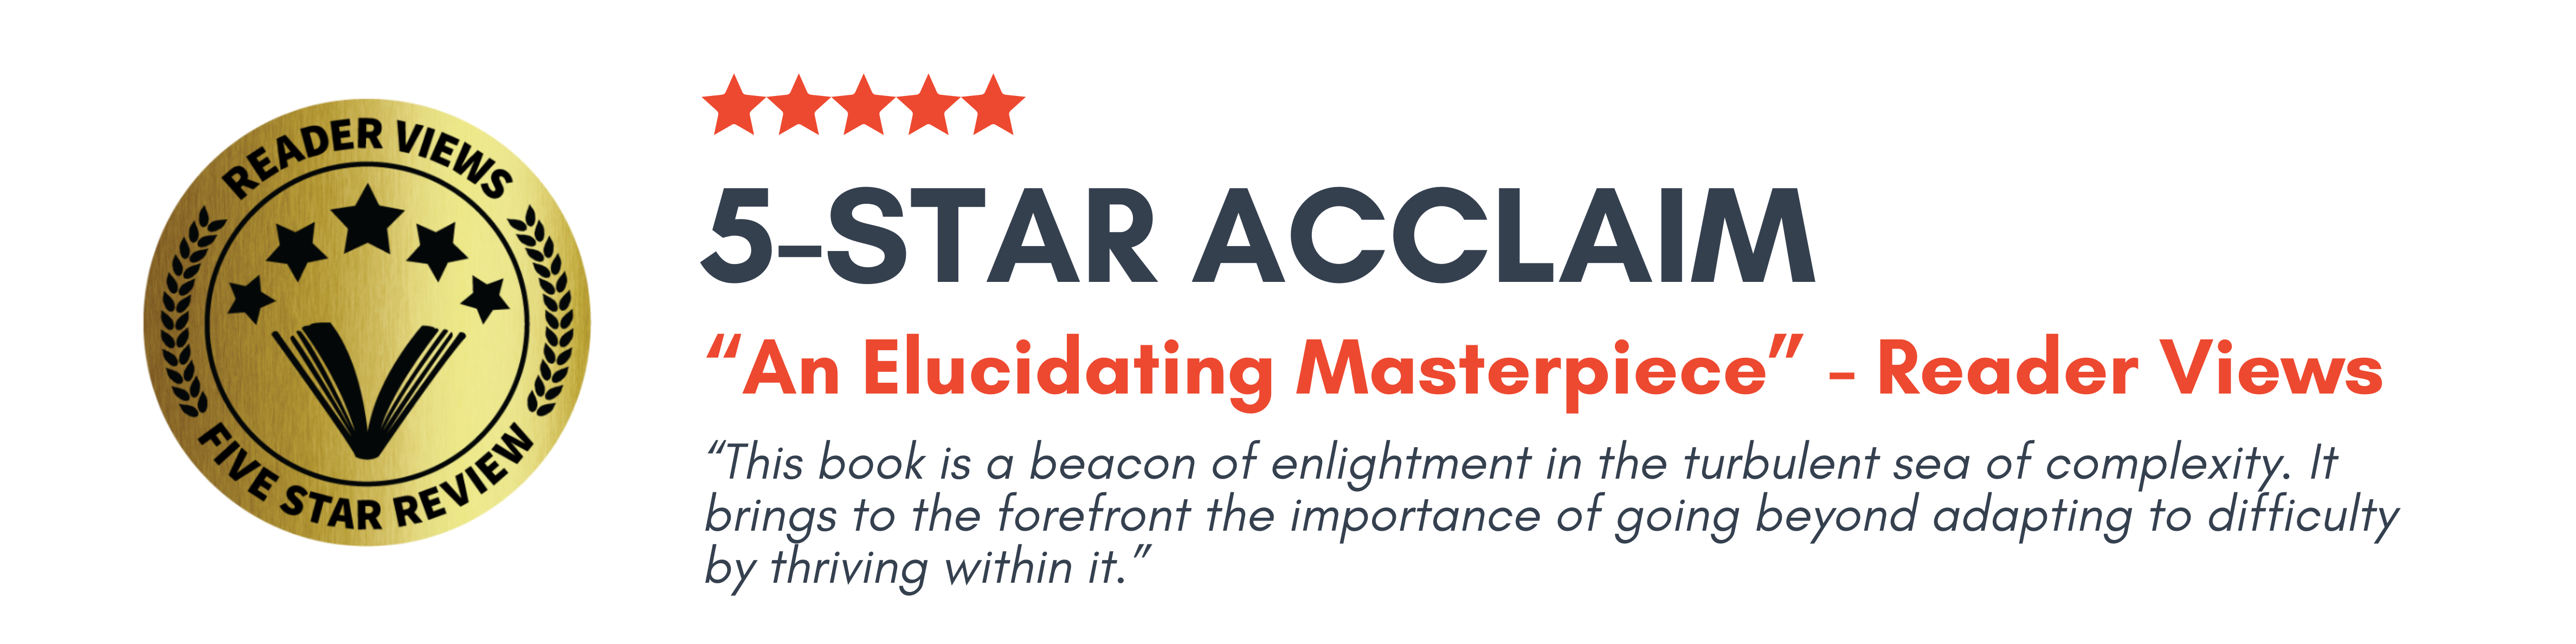 5-Star Acclaim for Inception Mindset by Dr. Robert Radi